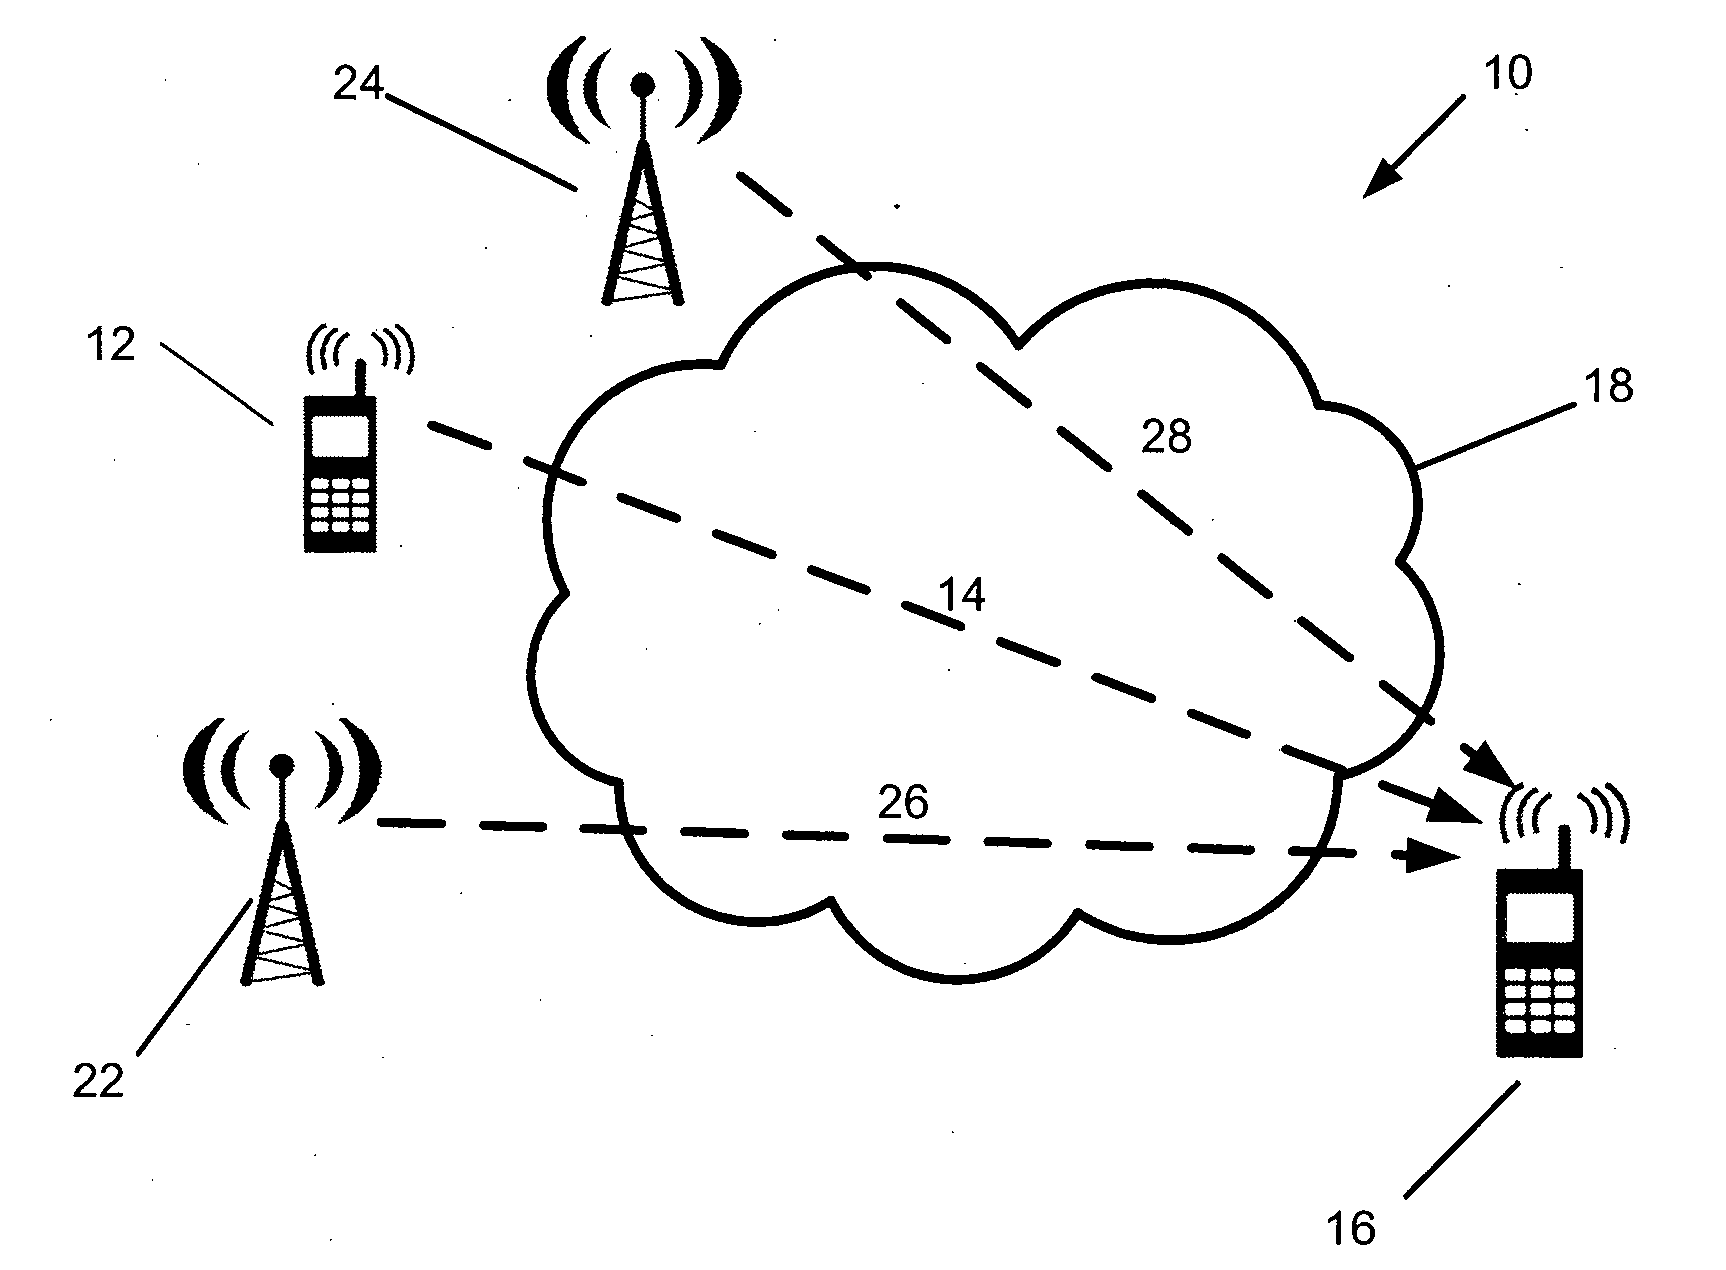 Method for improving channel estimation performance in dynamic spectrum access multicarrier systems